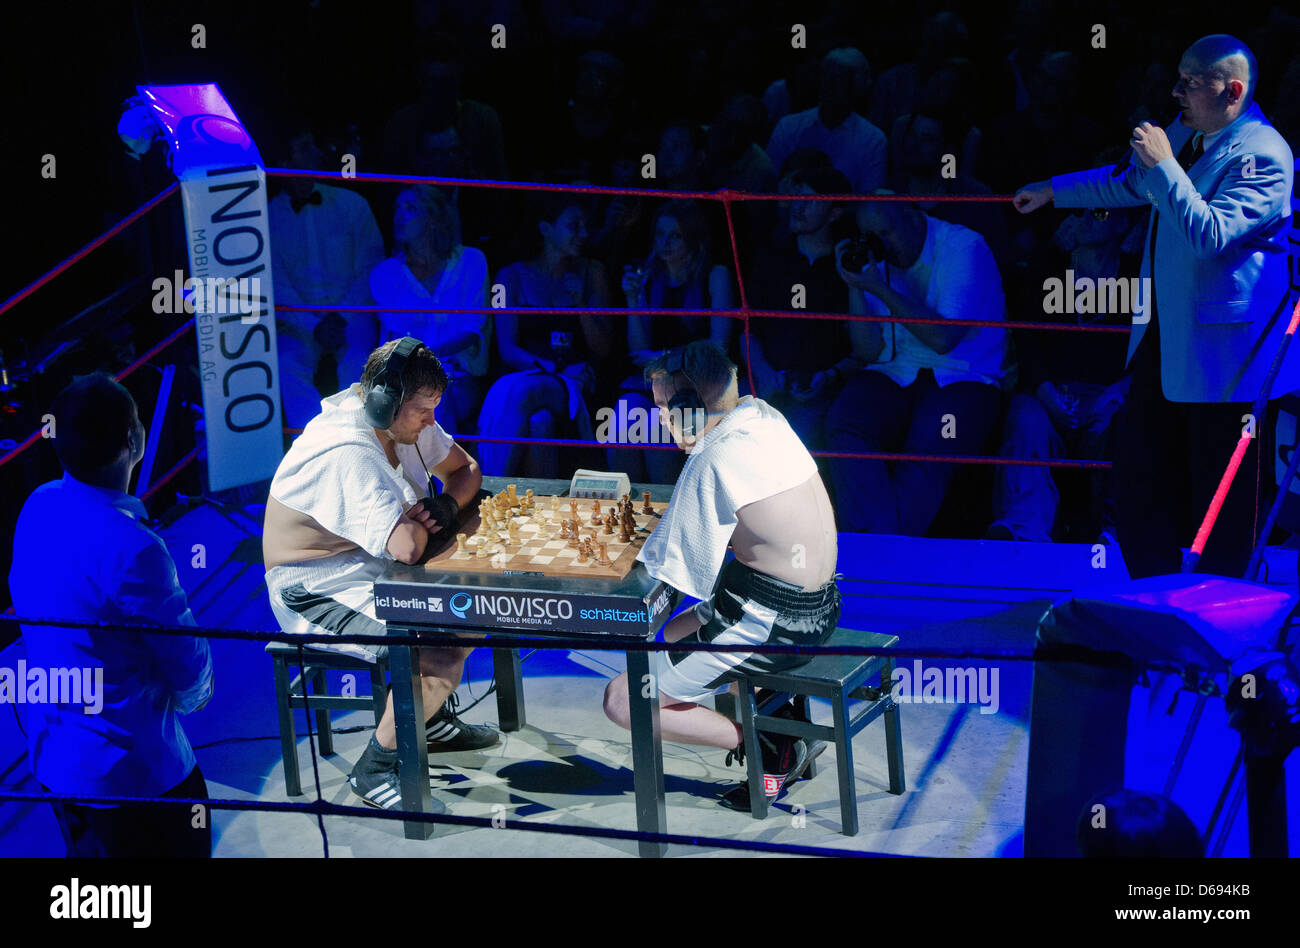 Chess Board As Boxing Ring with Chess Pieces Stock Illustration -  Illustration of chess, battlefield: 215512972